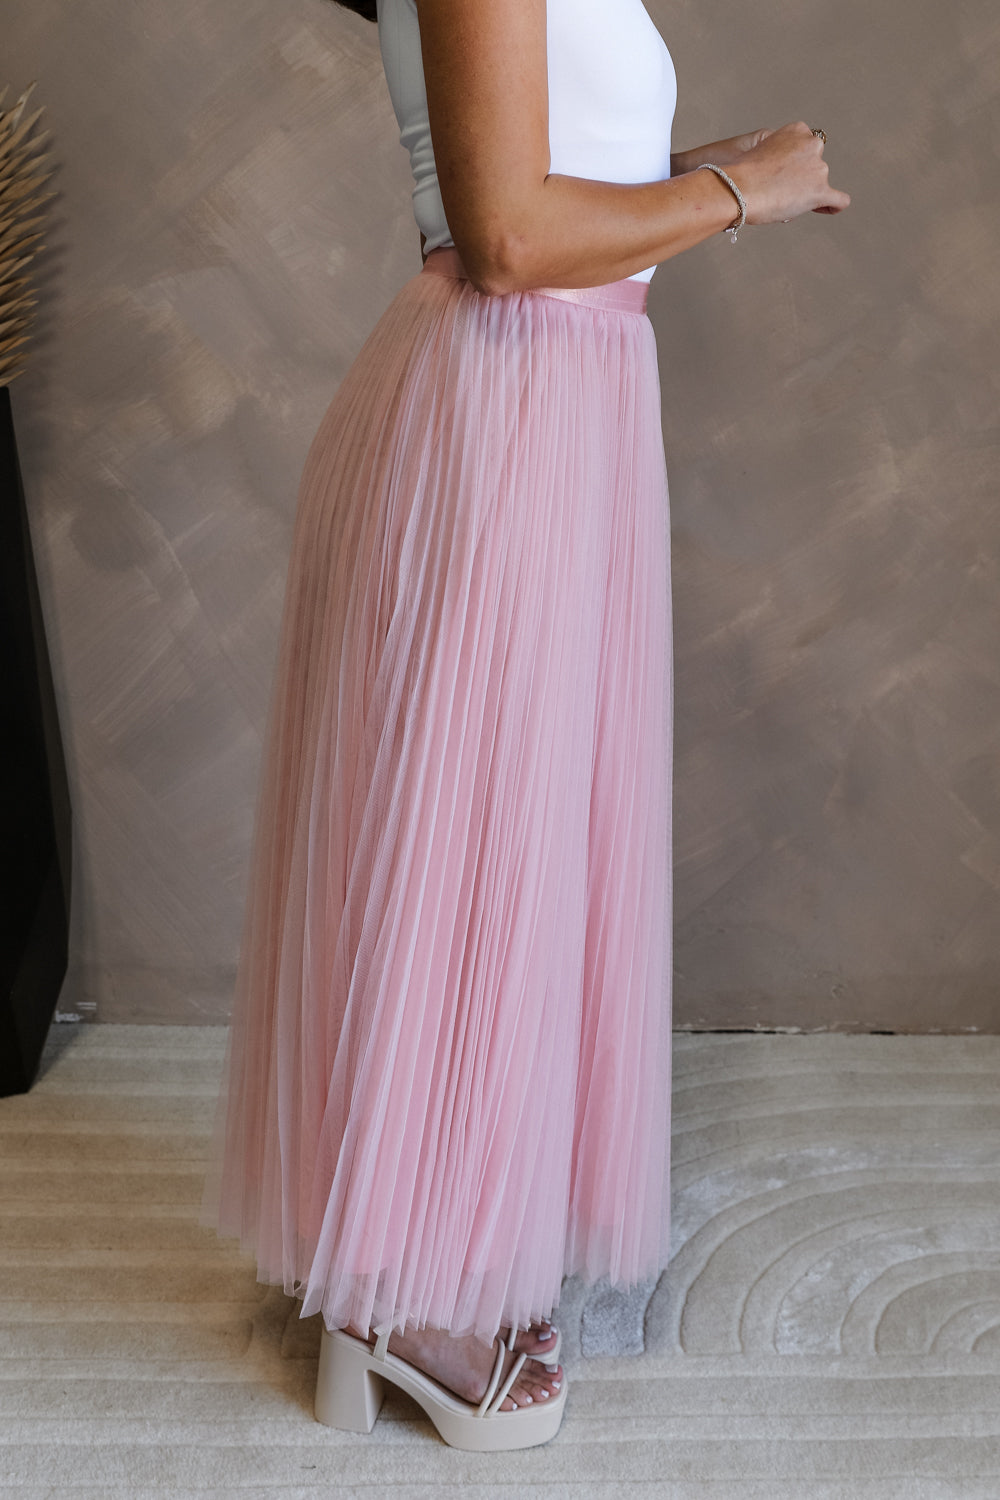 Side view of female model wearing the Adele Dusty Pink Pleated Tulle Midi Skirt which features Dusty Pink Tulle Pleated Fabric, Dusty Pink Lining, Midi Length and Satin Elastic Band